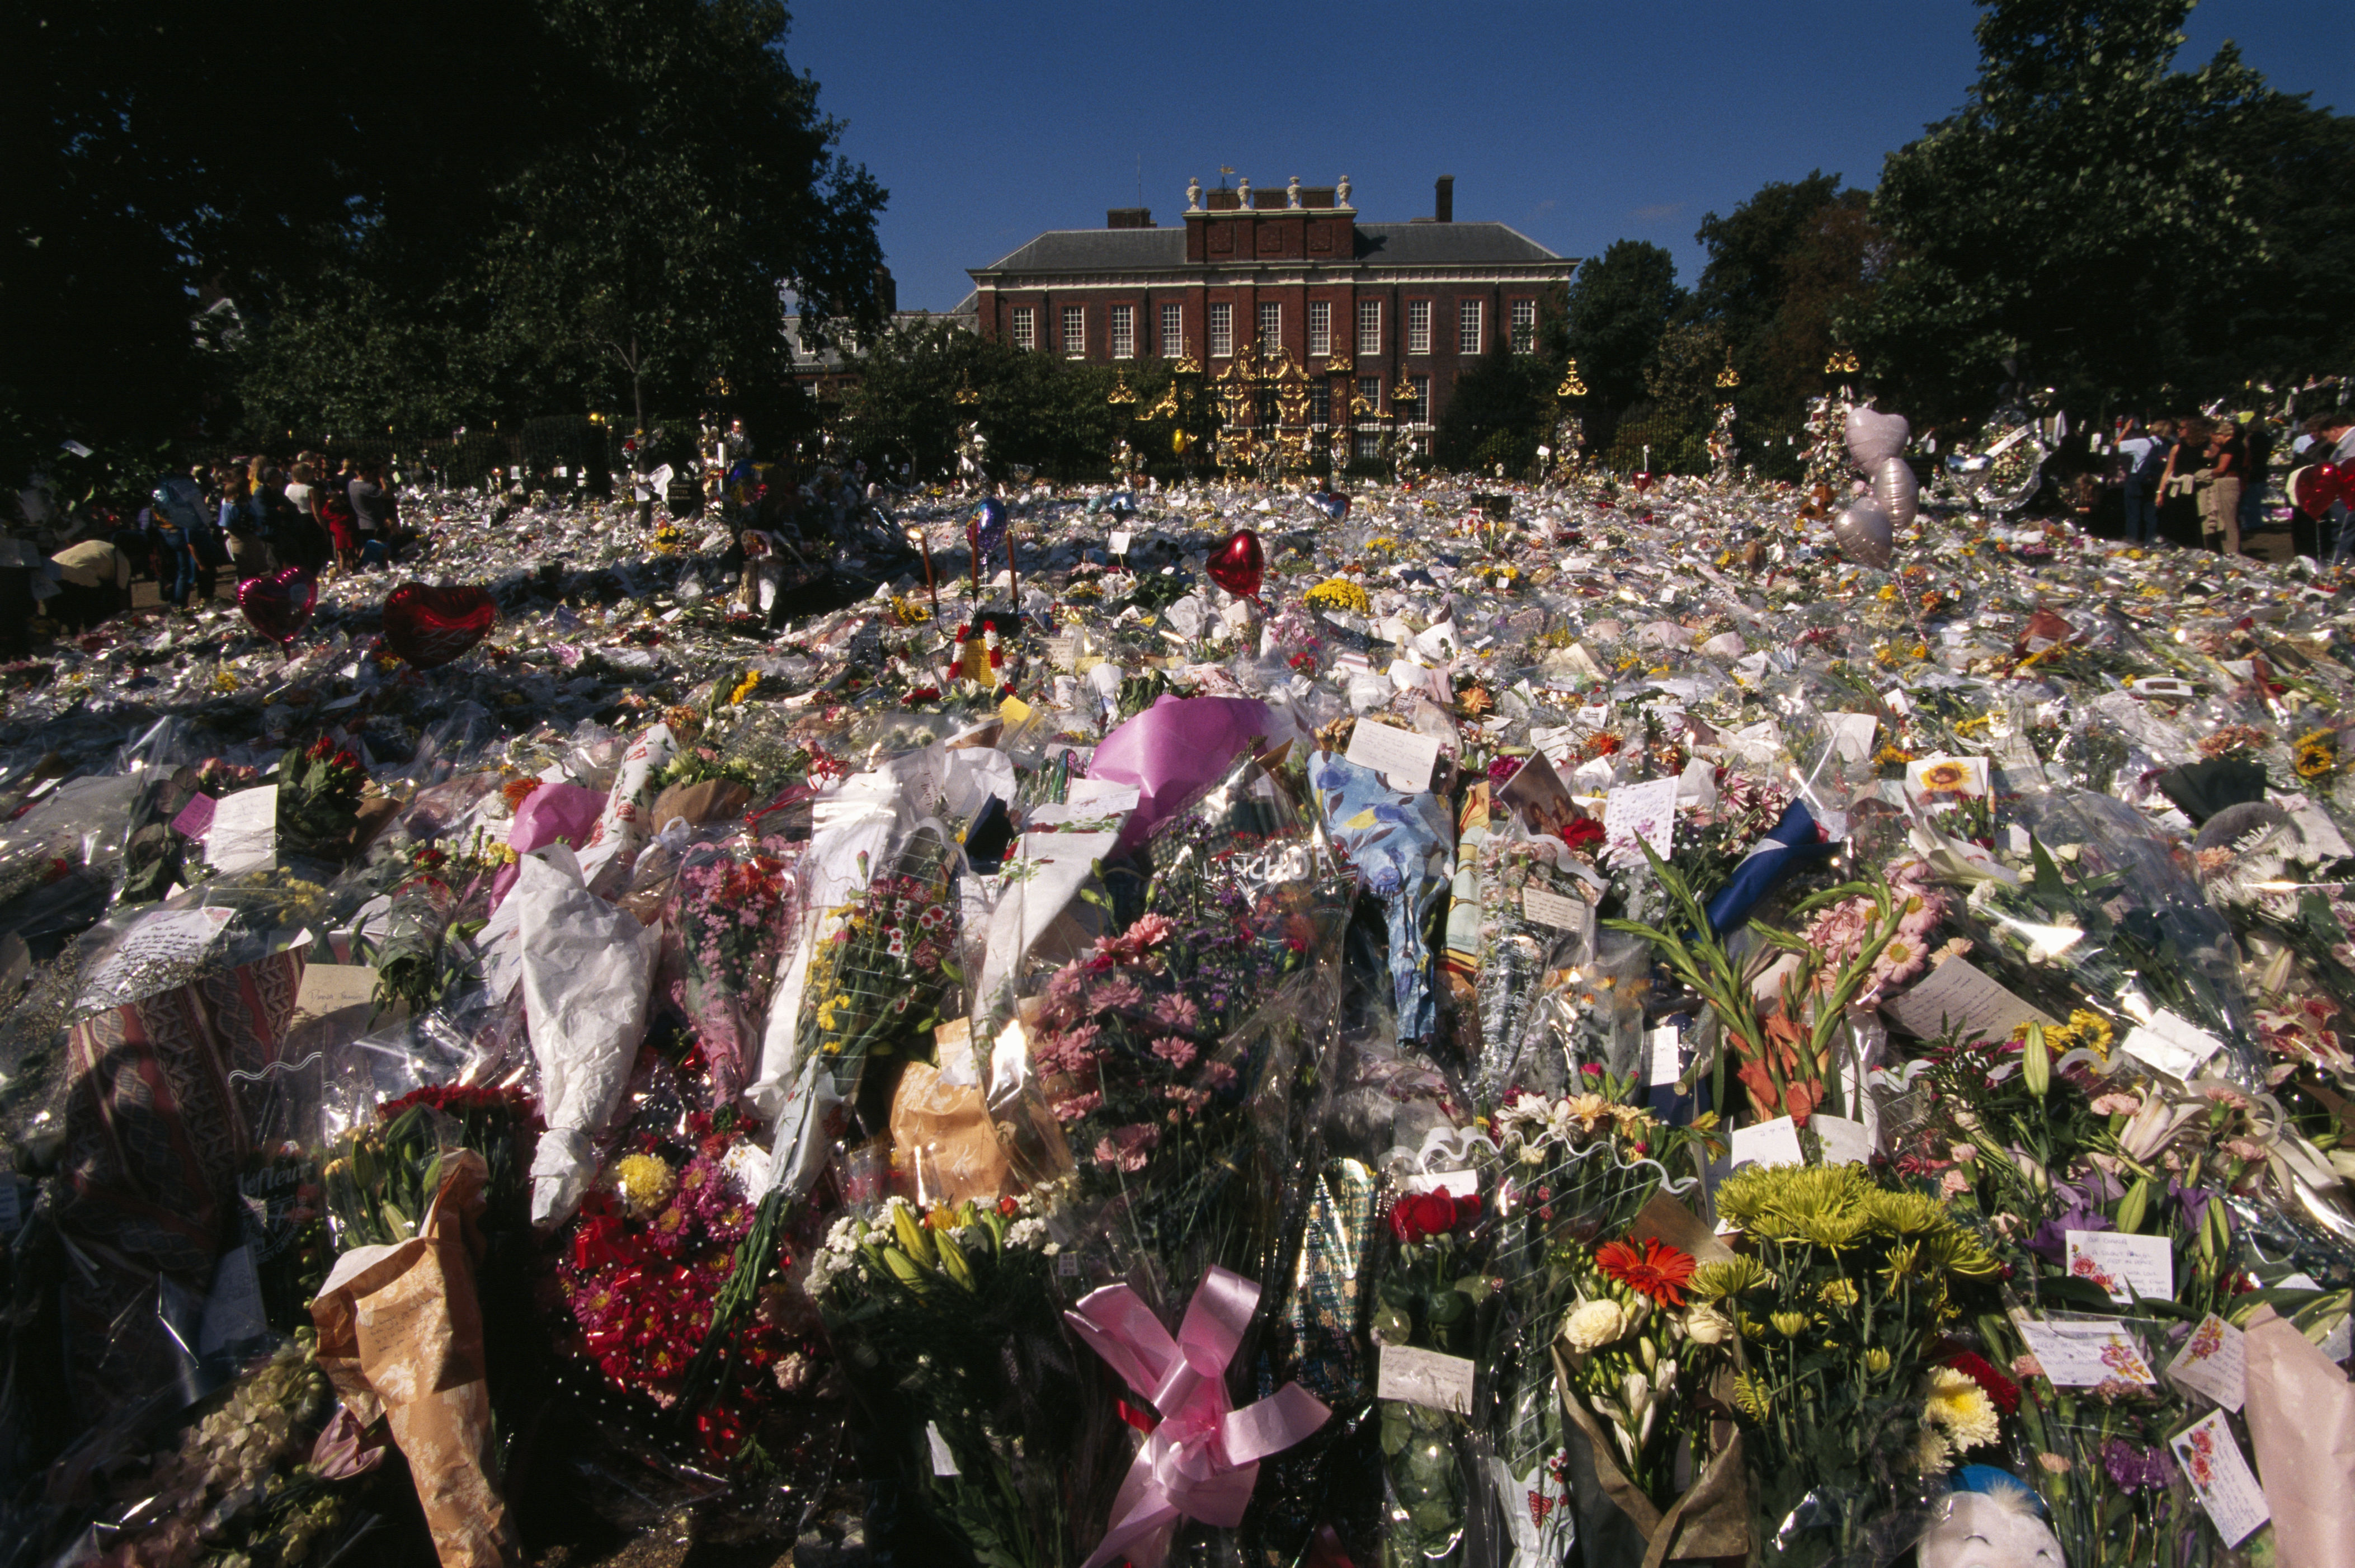 <p>This photo was taken on the day of Princess Diana's funeral in London, Sept. 6, 1997, and shows some of the more than 1 million bouquets of flowers that the public laid in front of her London home, Kensington Palace.</p>